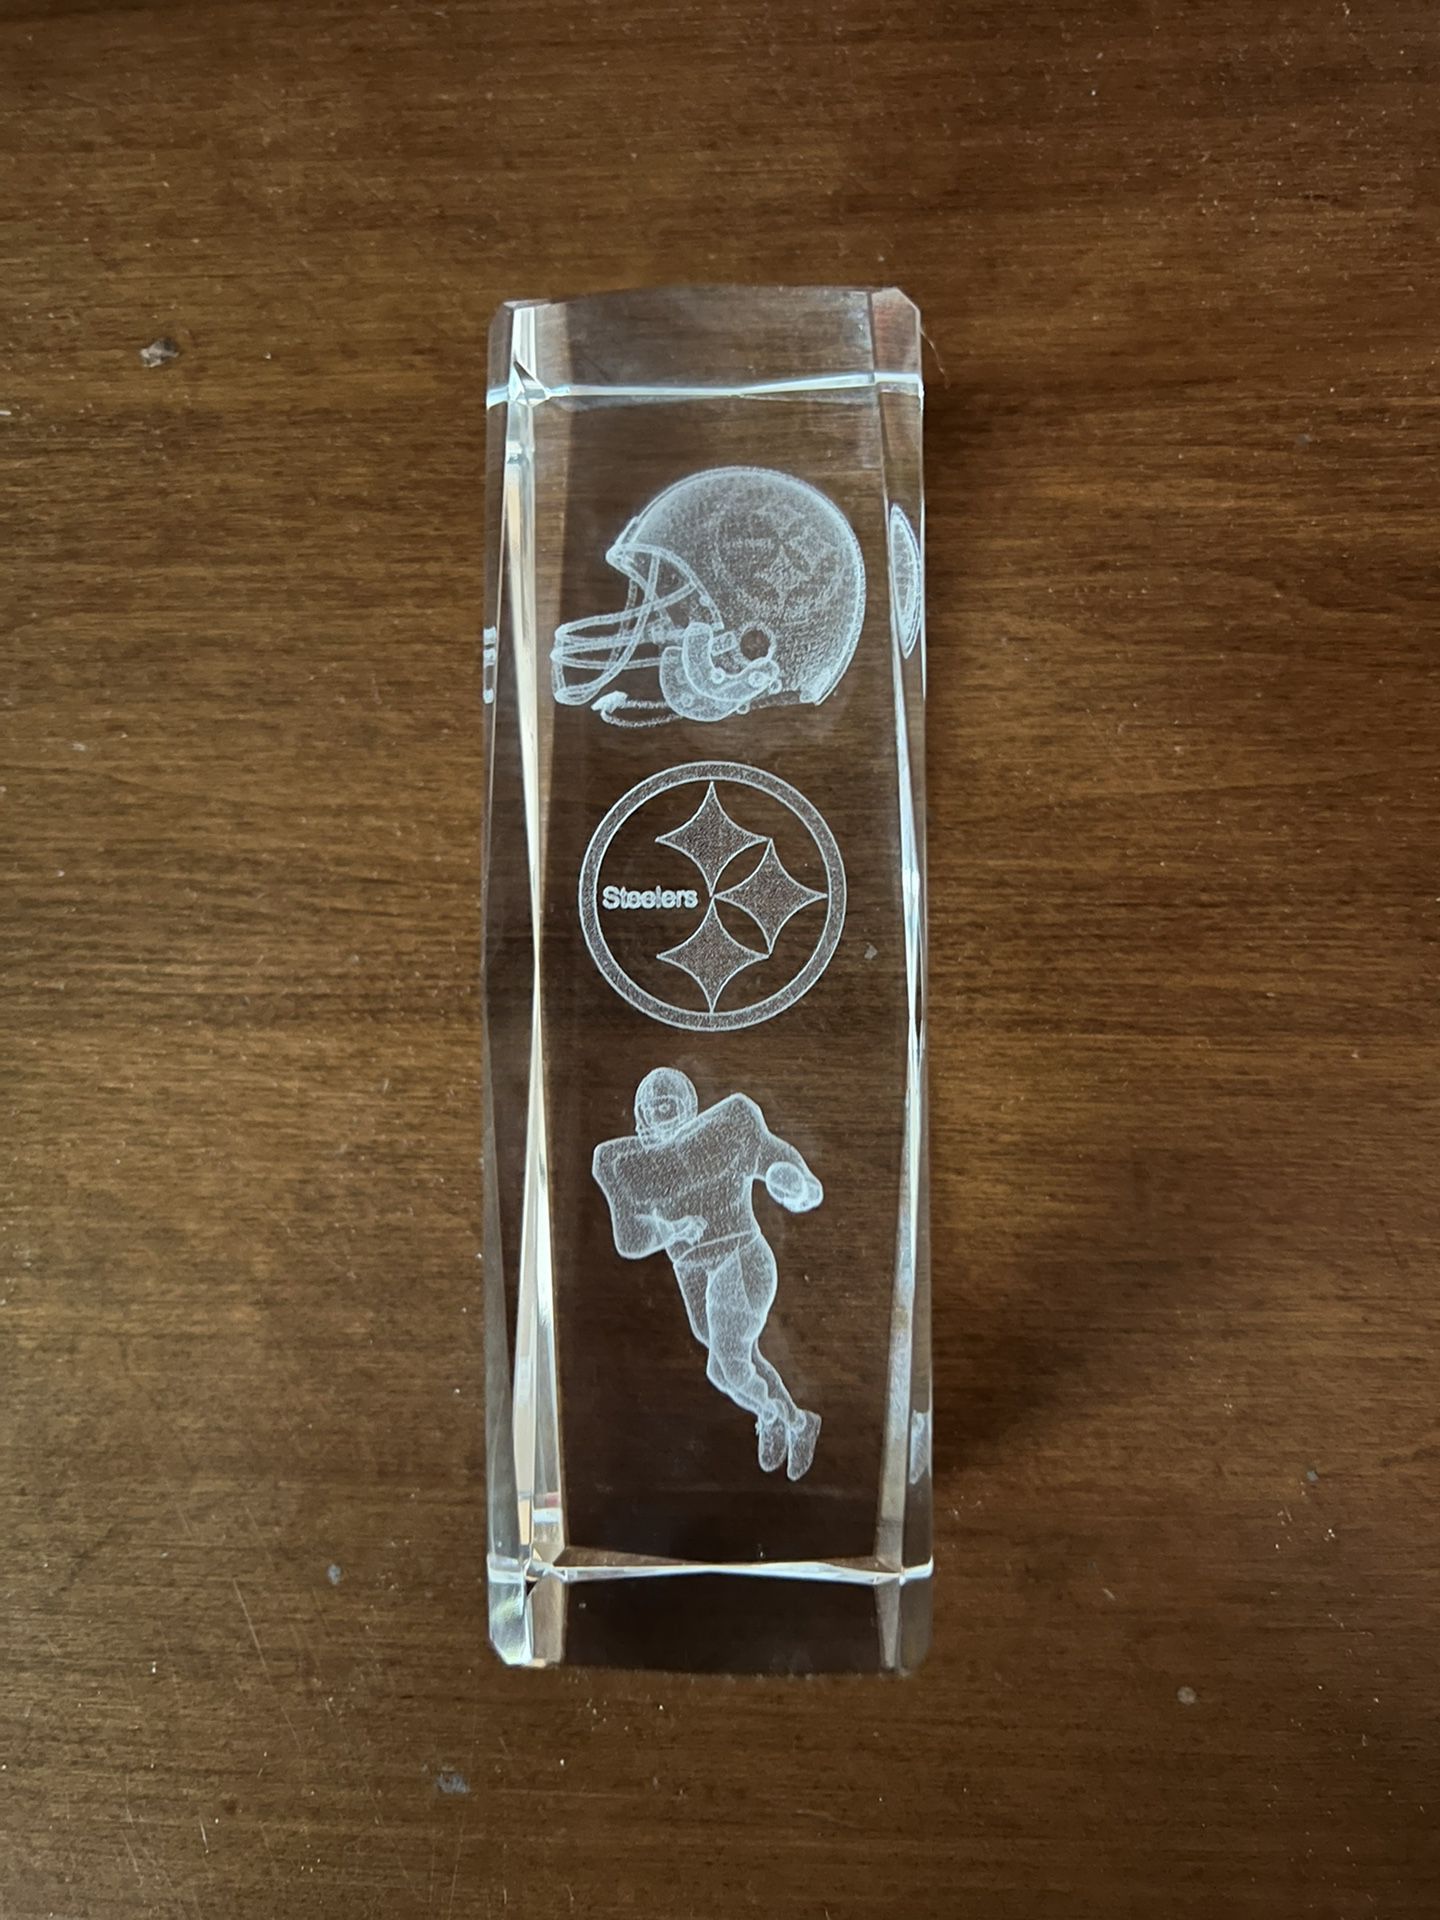 PITTSBURGH STEELERS 3D Laser Etched Crystal Cube, Block, Paperweight—5-3/4 inches tall